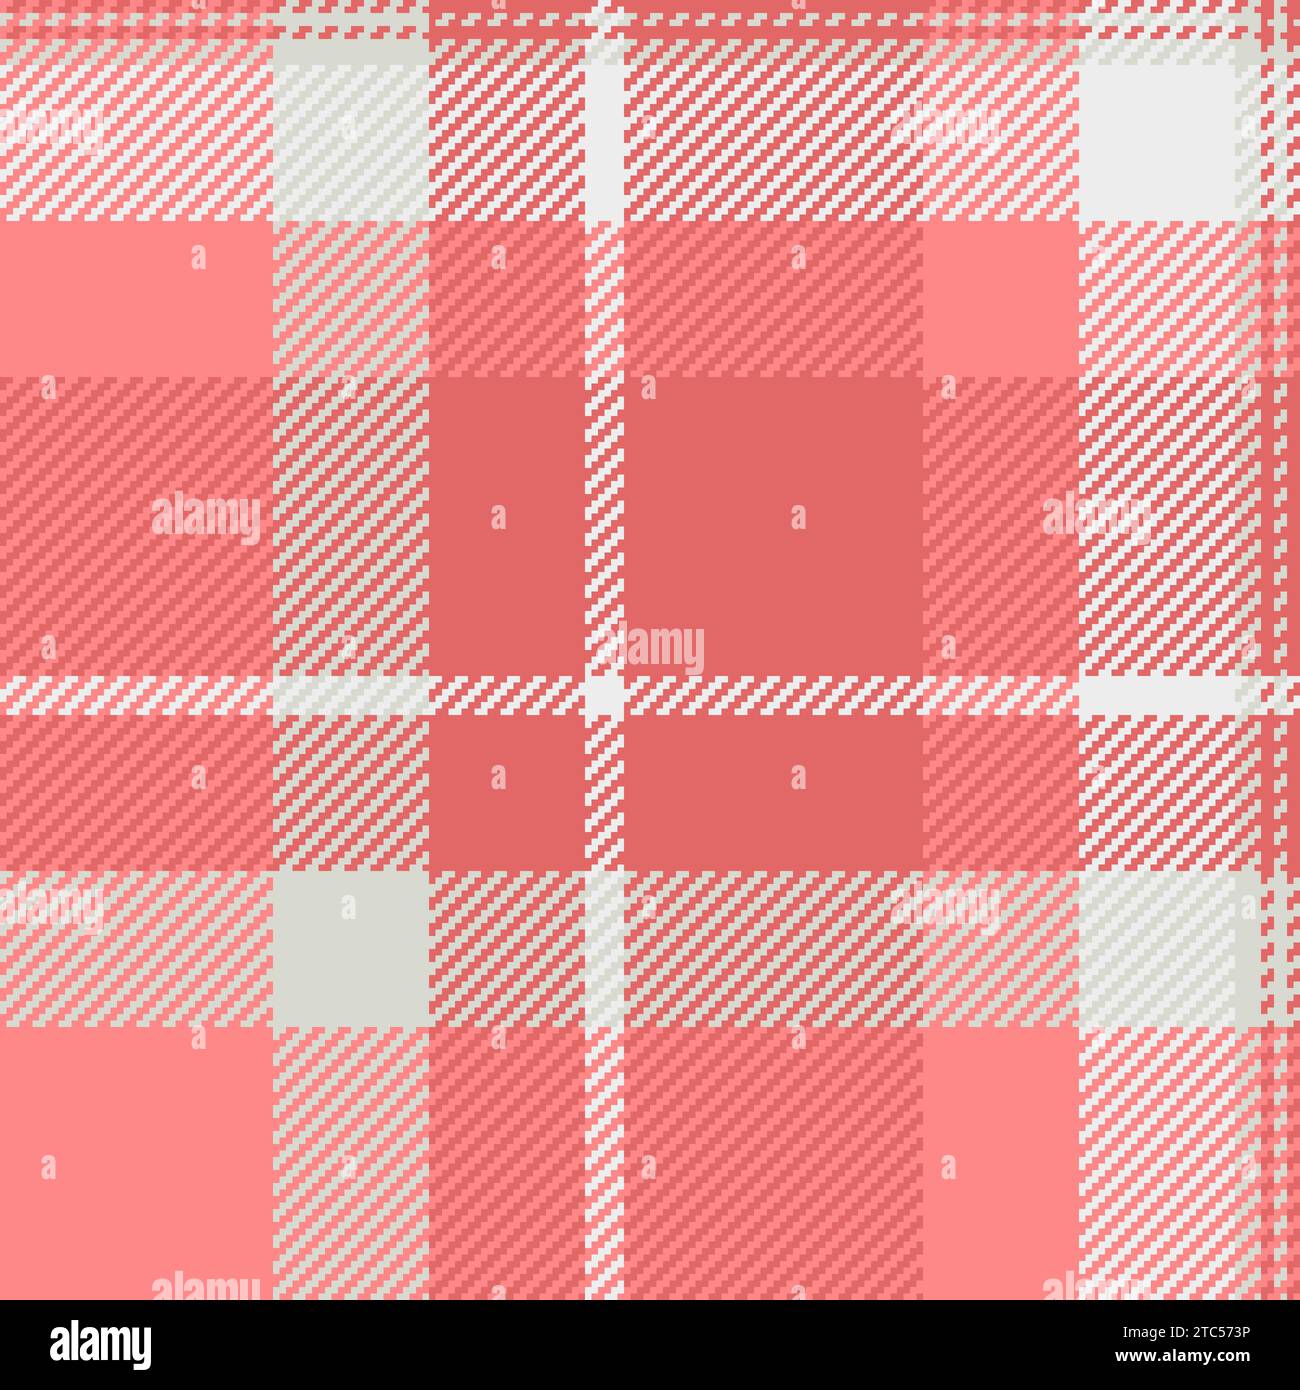 Outfit texture vector seamless, celtic plaid textile tartan. Merry background fabric check pattern in red and white colors. Stock Vector